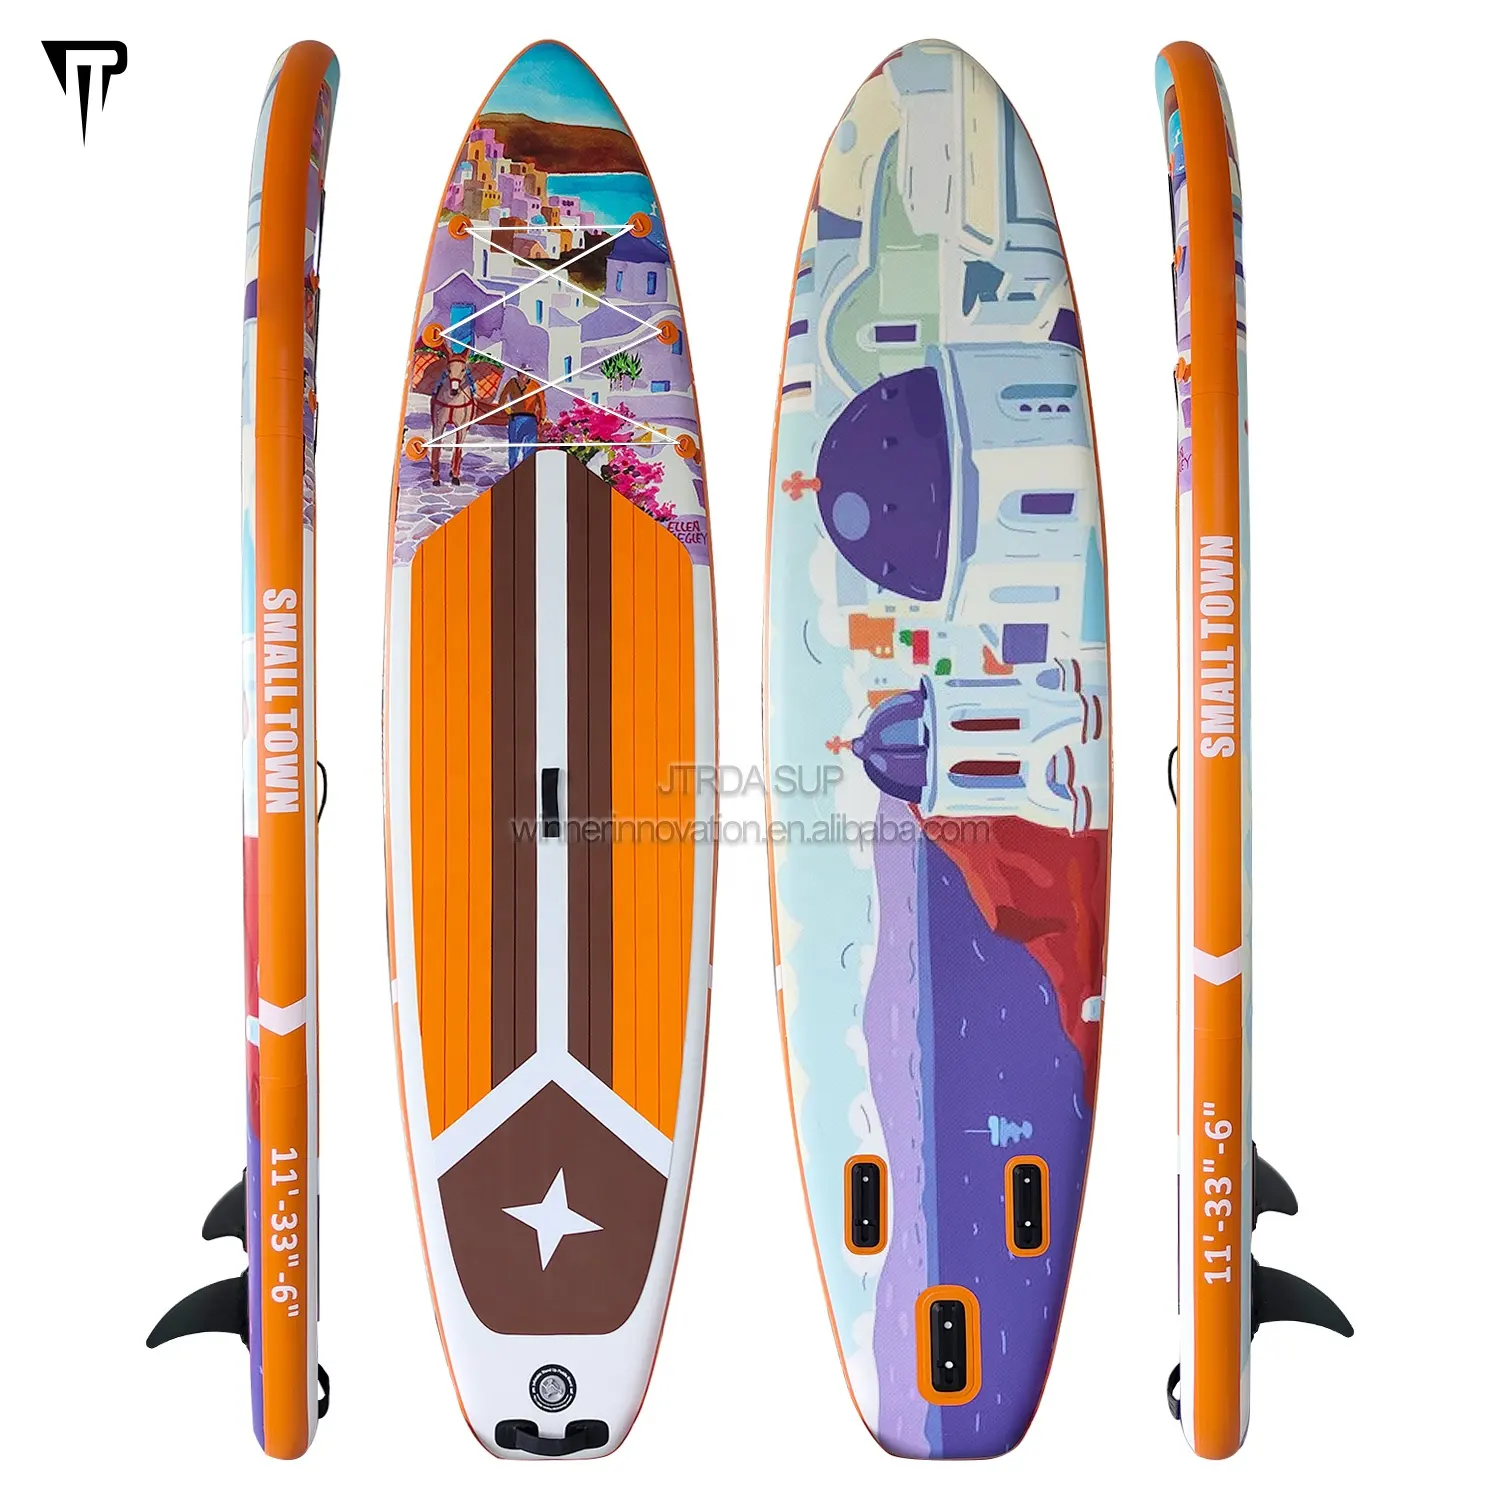 JTRDA 11 'Small House Design Paddle Board Chine fournisseur de SUP personnalisé CE stand up board surf paddle gonflable sup